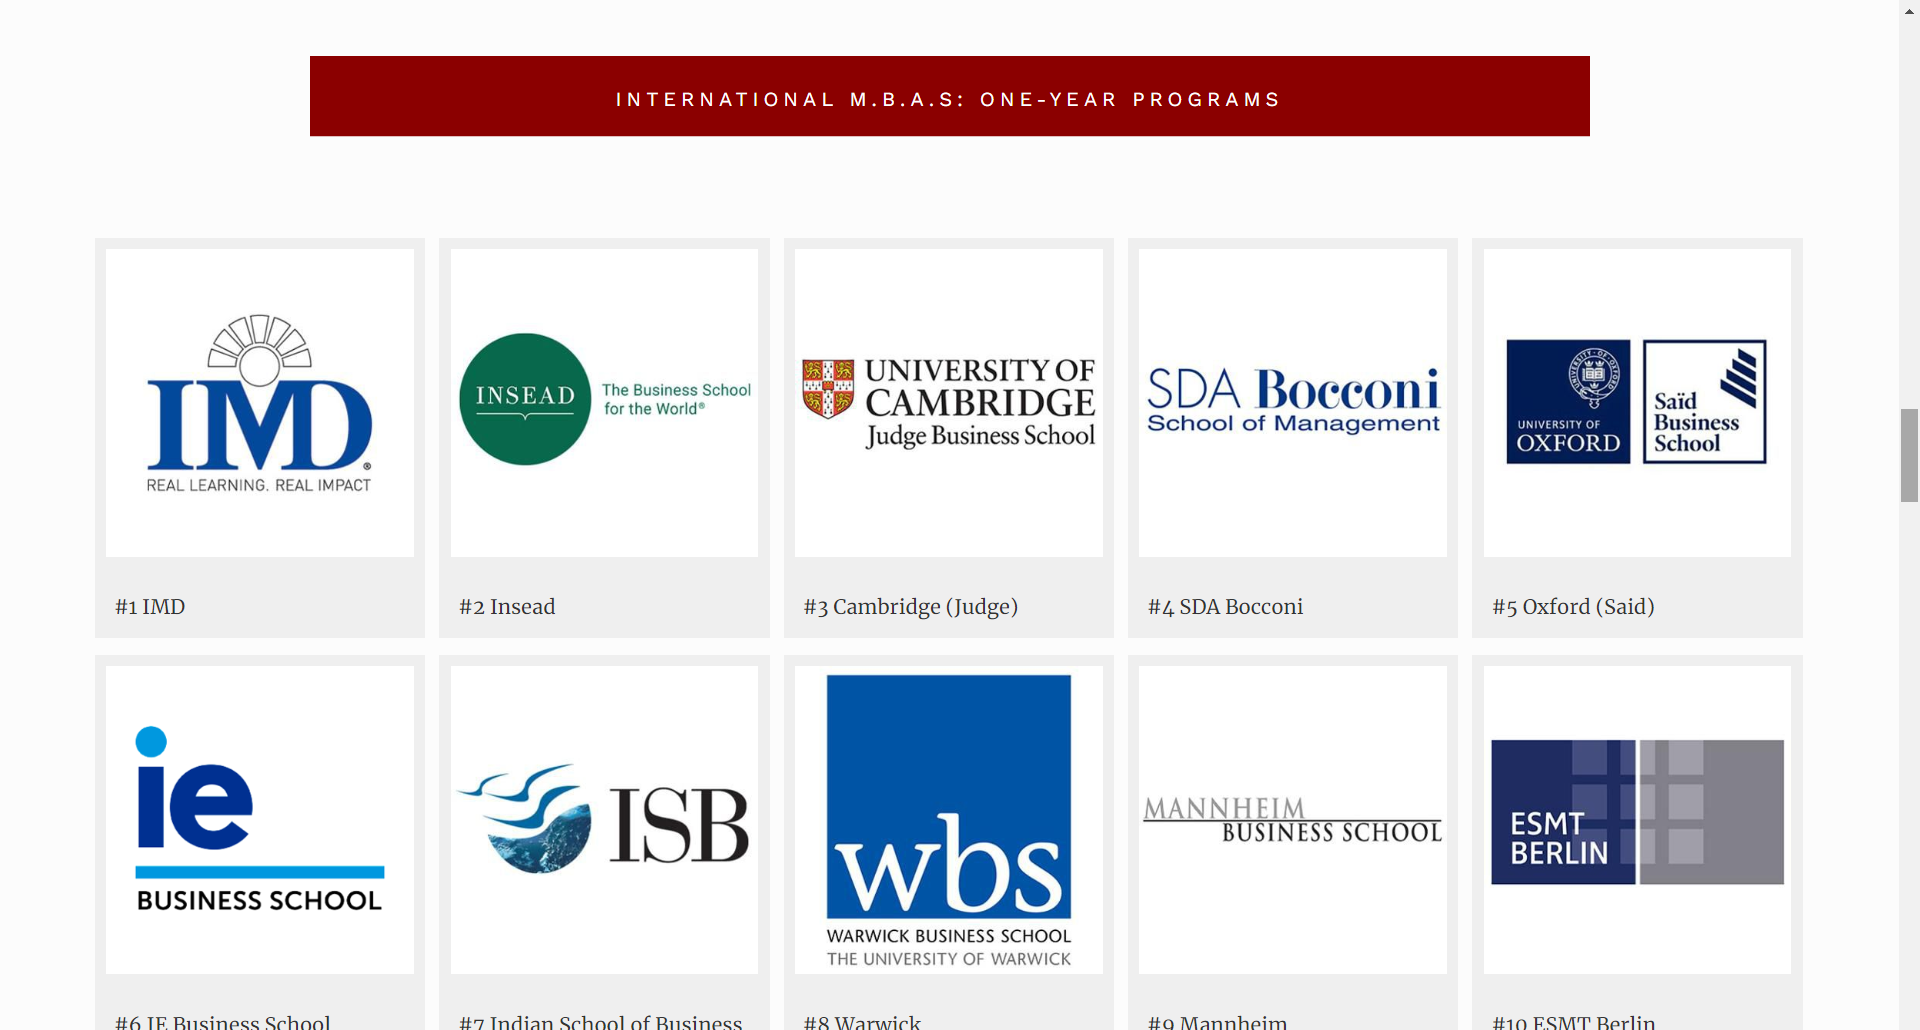 Forbes-2019-international-1-year-programs.png